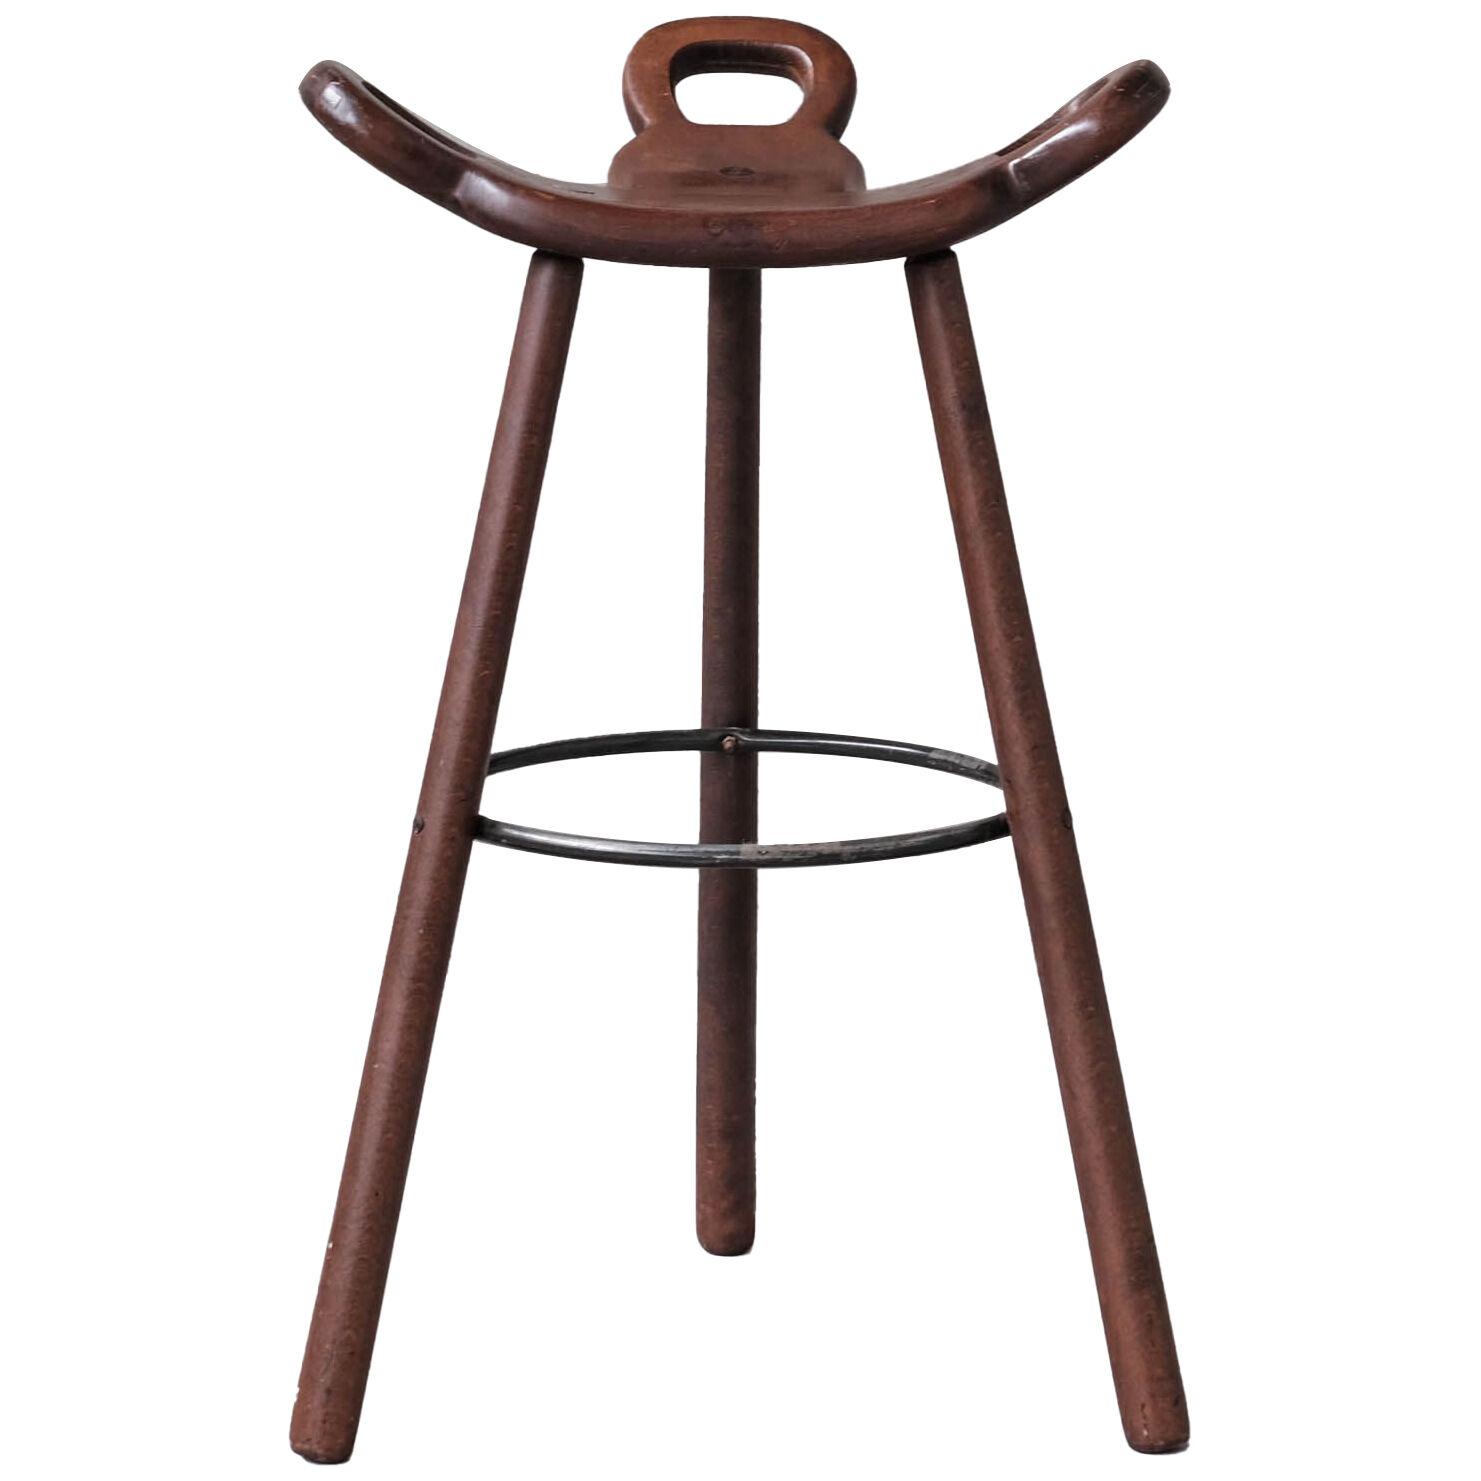 Brutalist Mid-Century 'Marbella' Bar Stools (up to 8 Available)